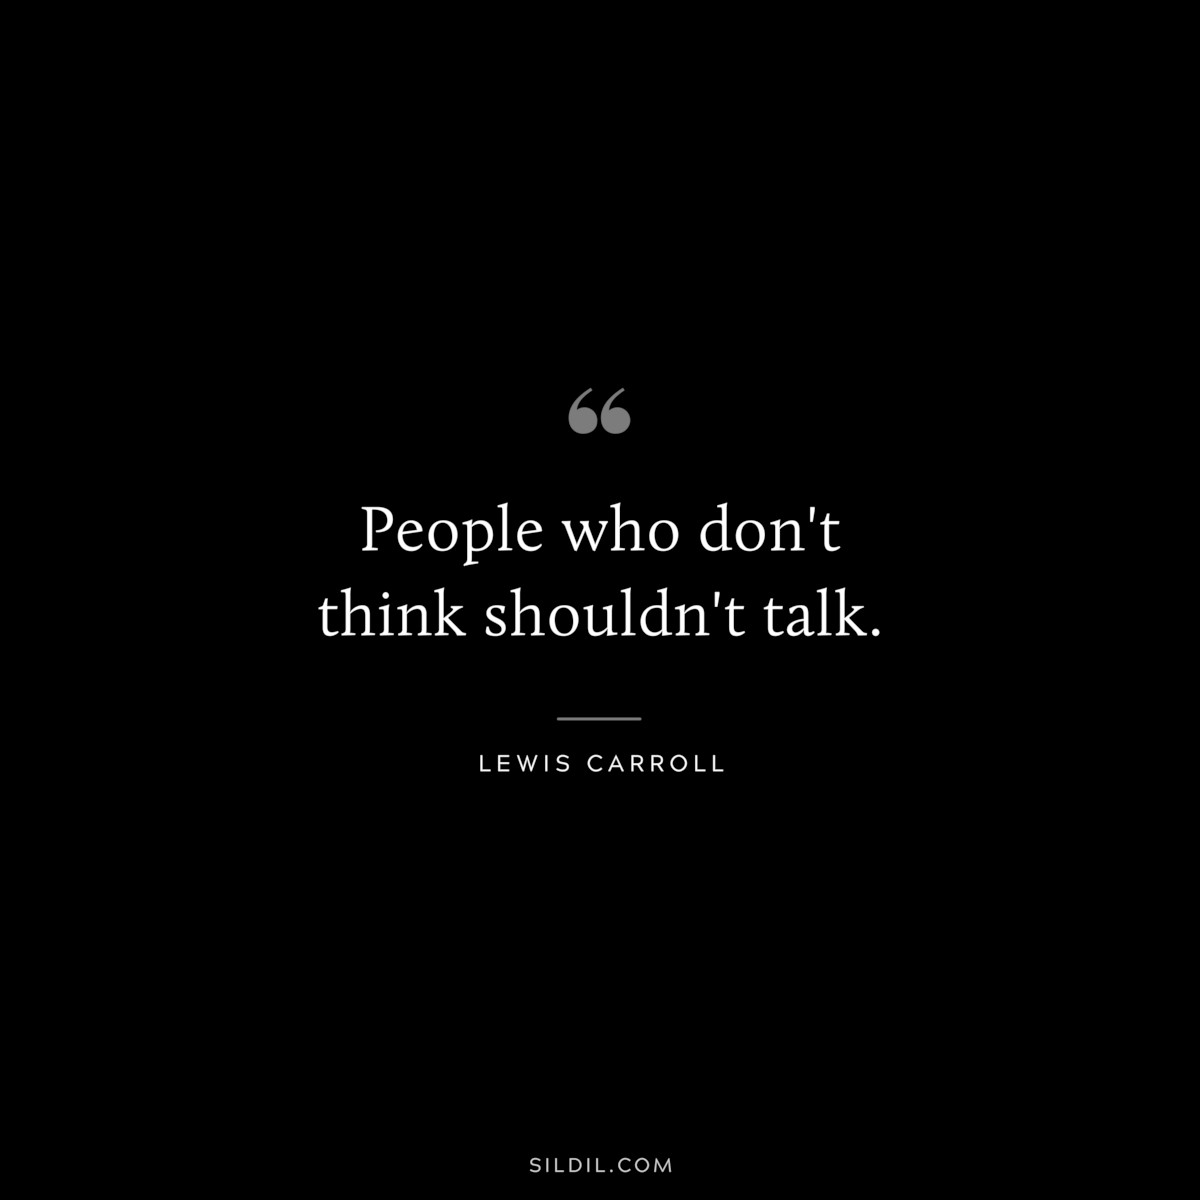 People who don't think shouldn't talk.